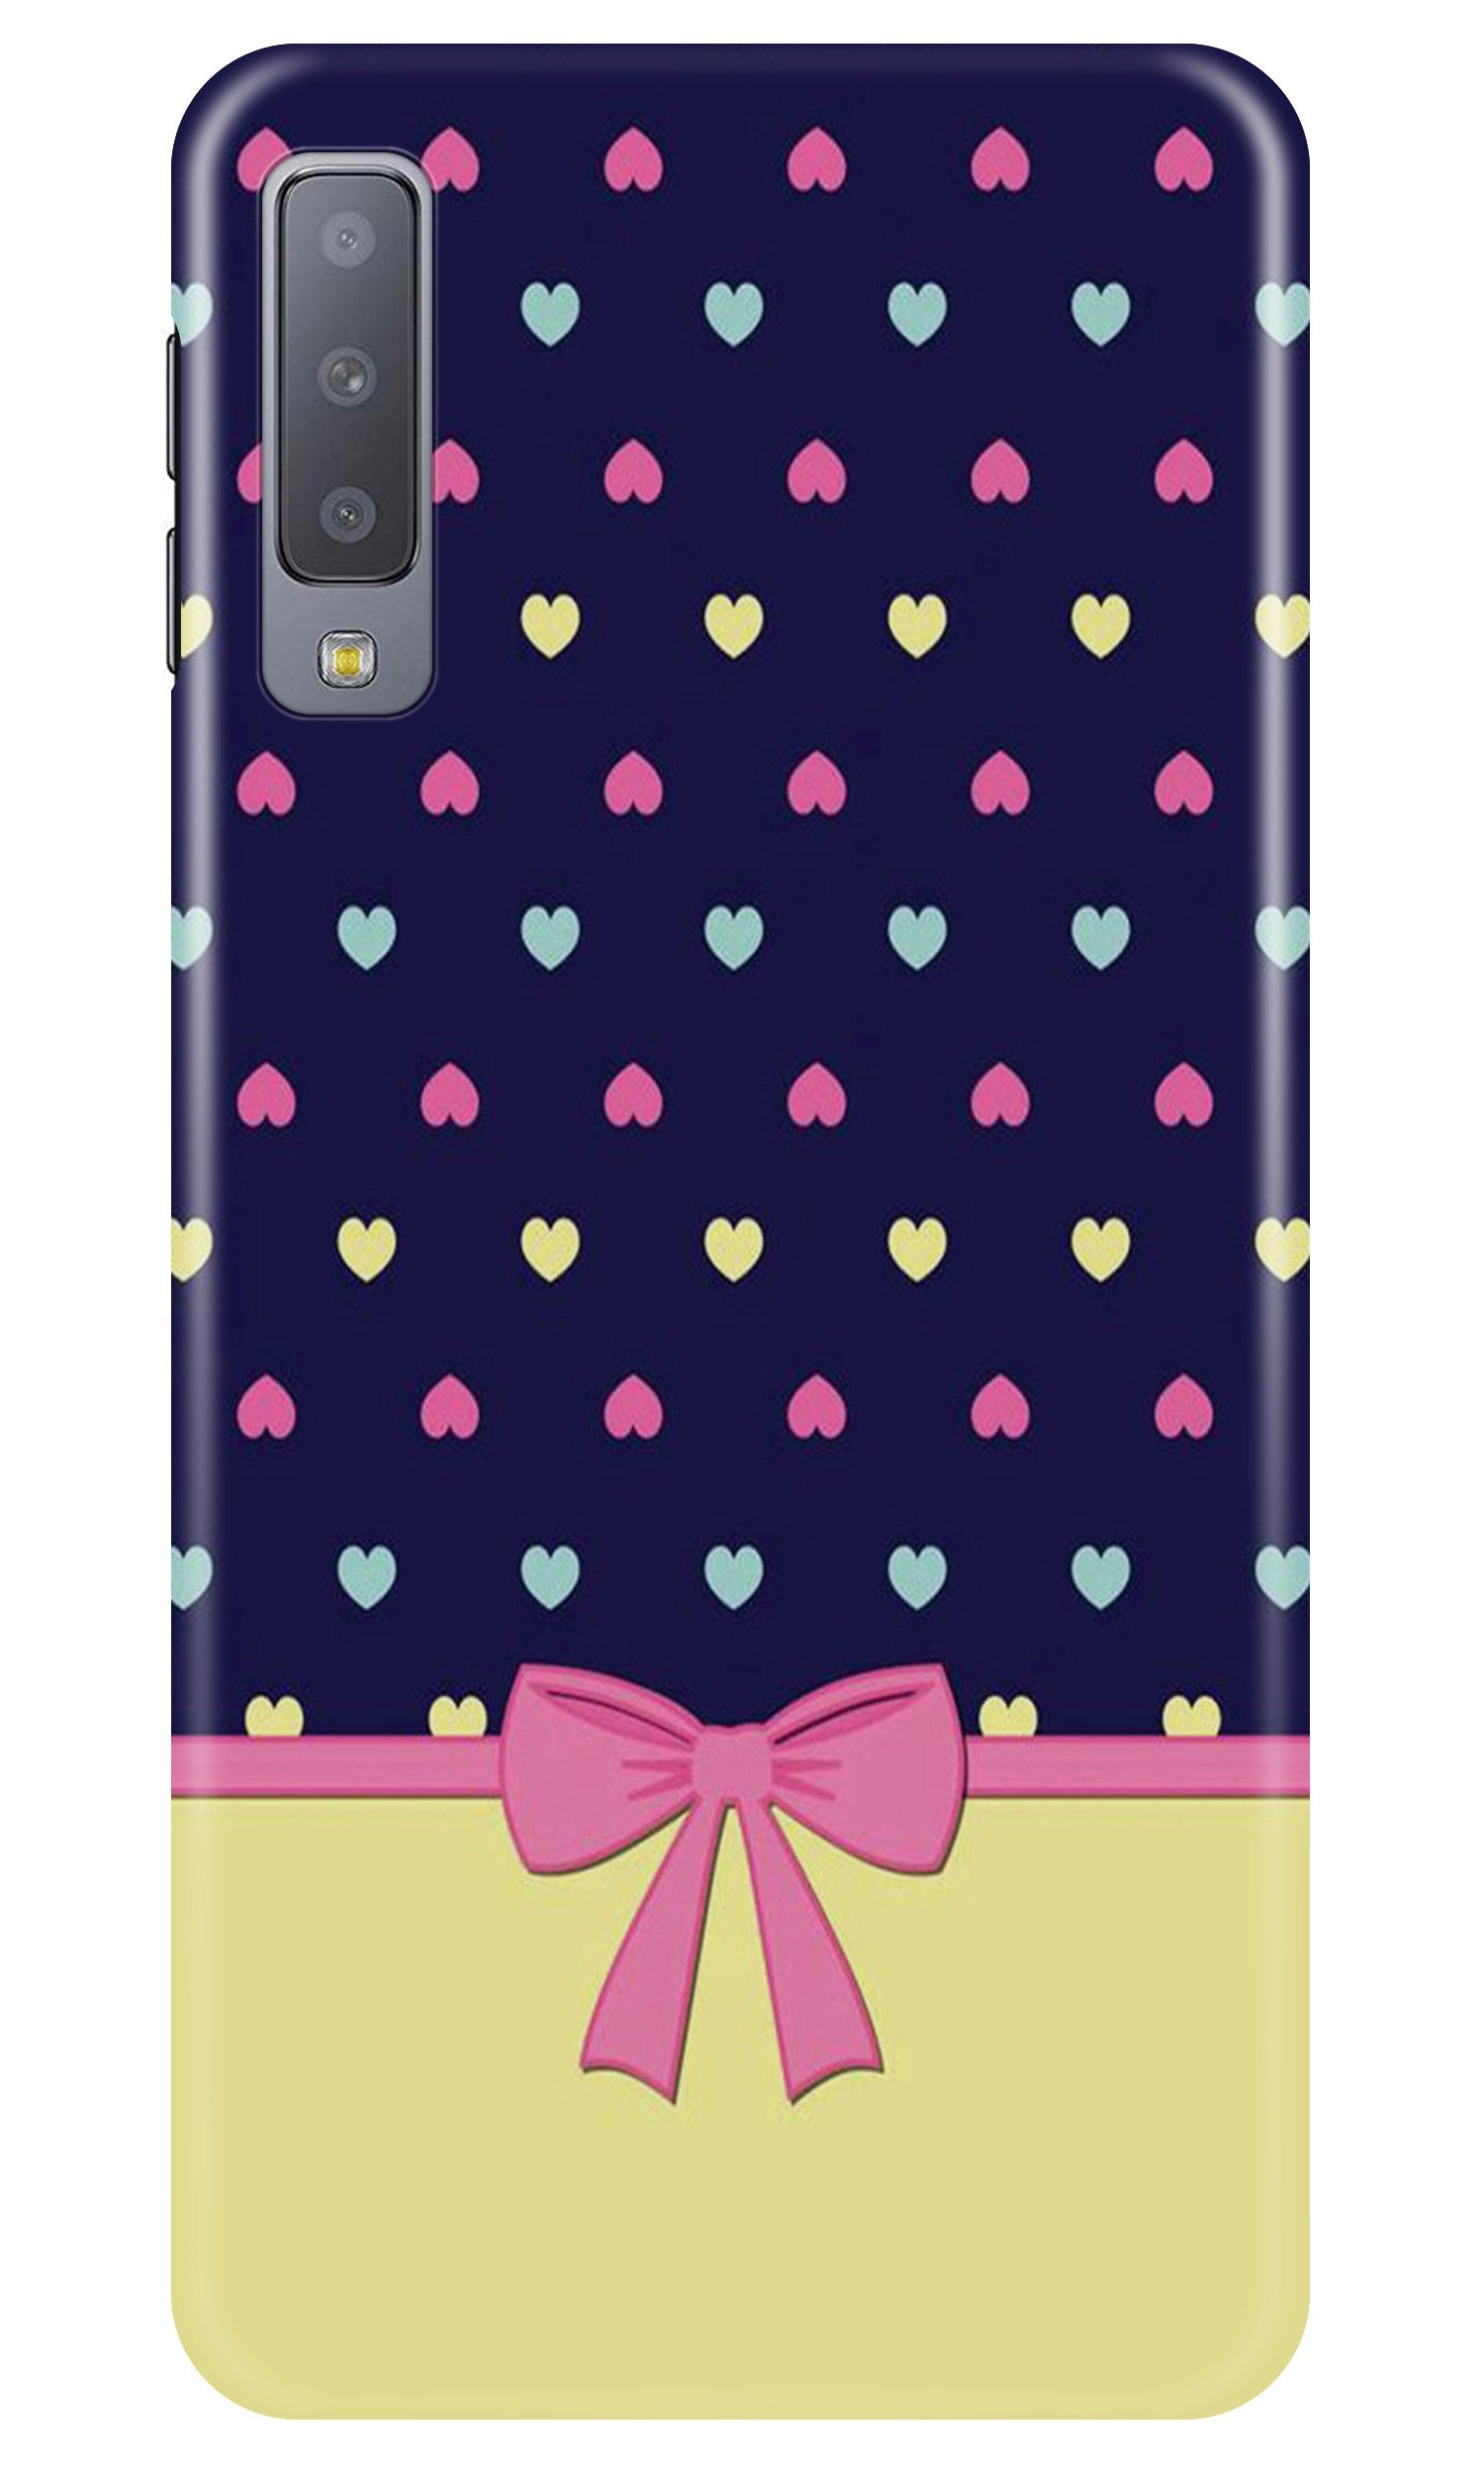 Gift Wrap5 Case for Samung Galaxy A70s